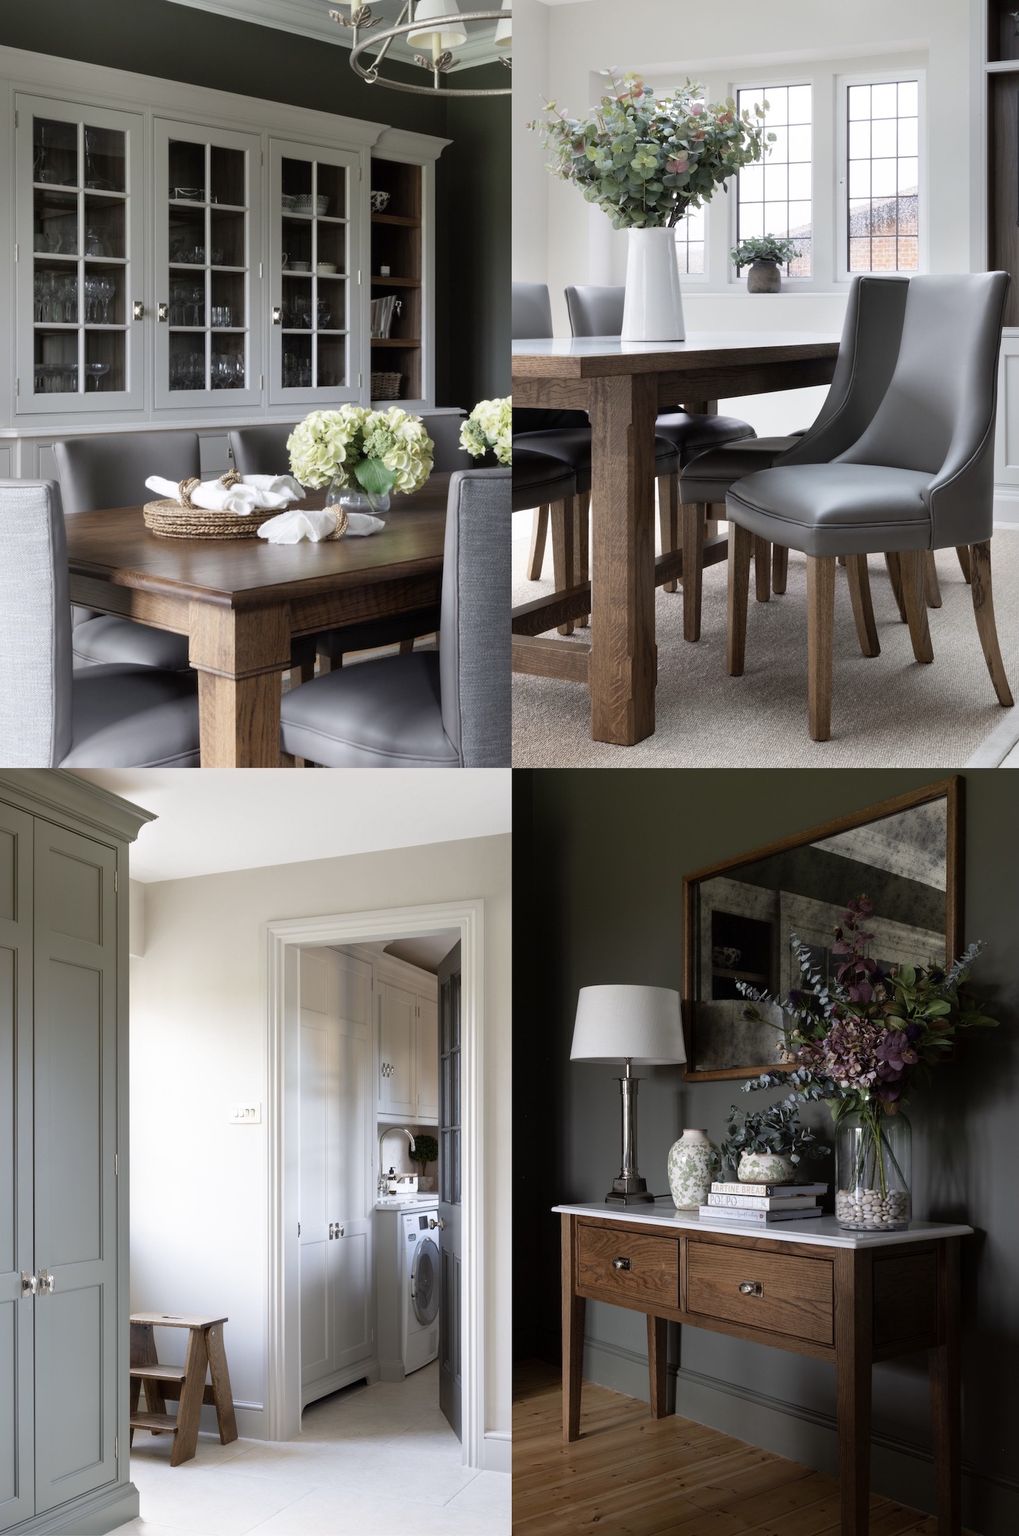 Furniture & Accessories | The Westerham Project